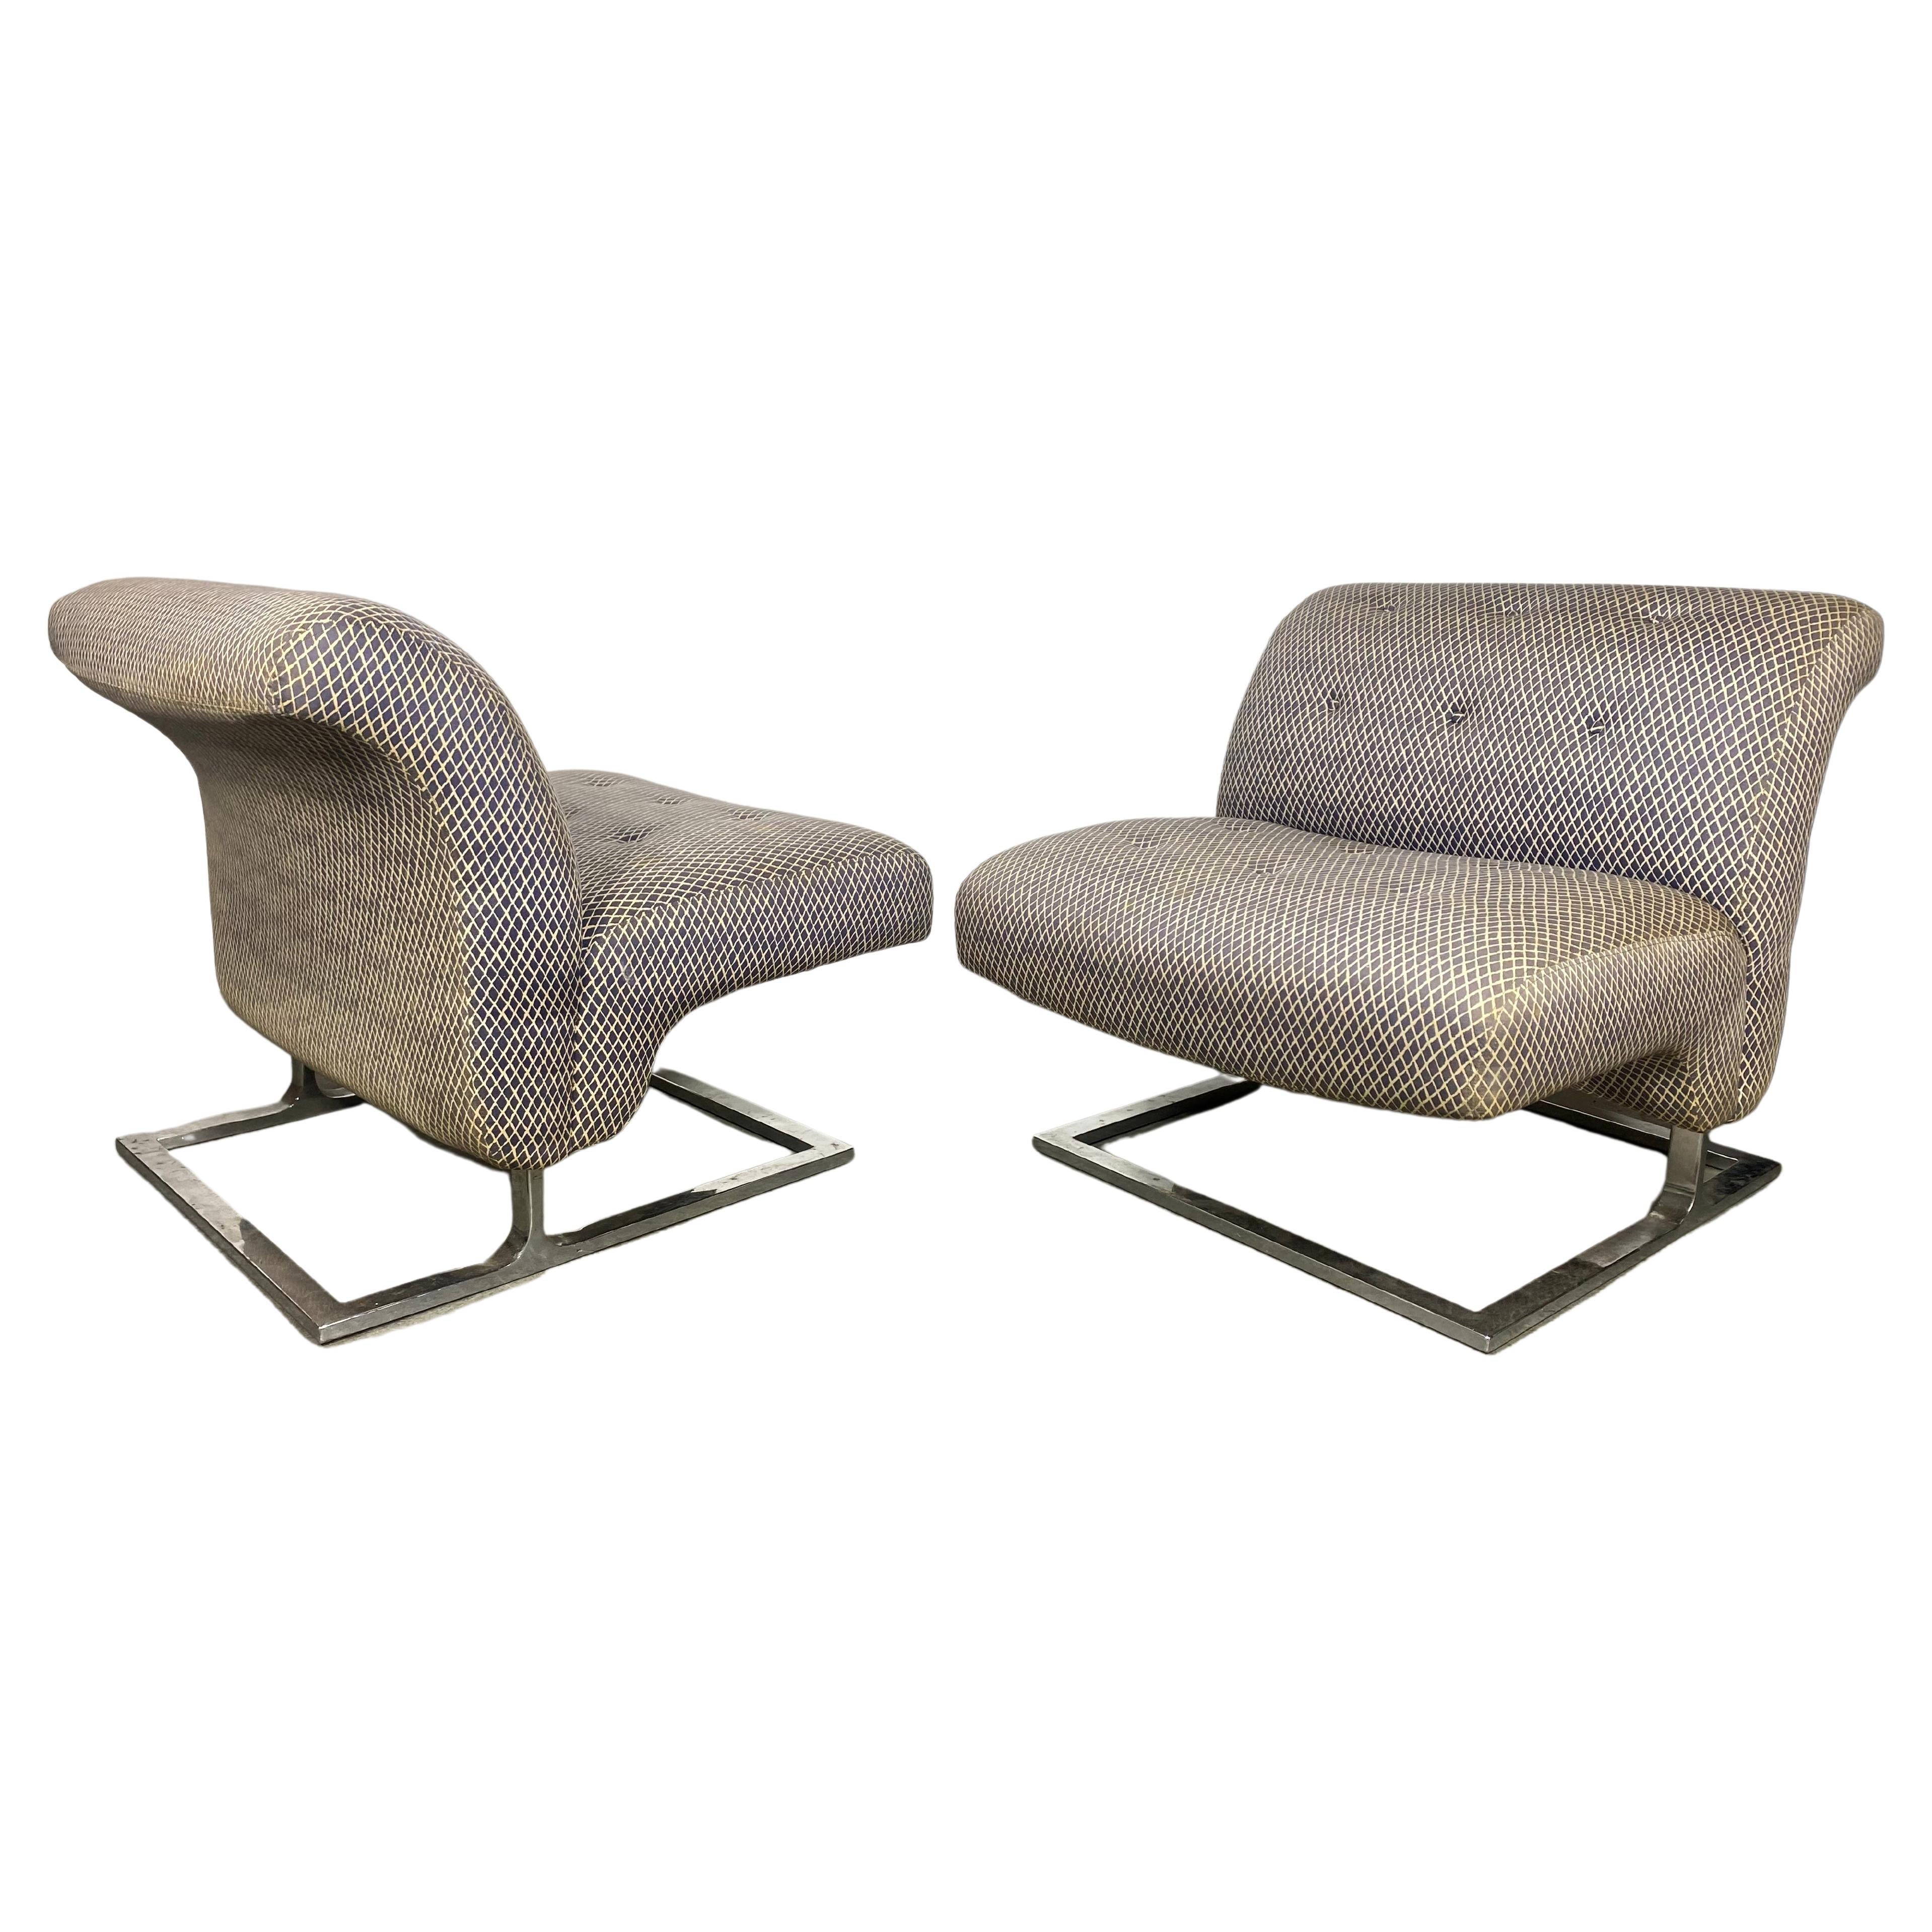 1970s Craft Associates Wave Style Lounge Chairs , chrome base Adrian Pearsall For Sale